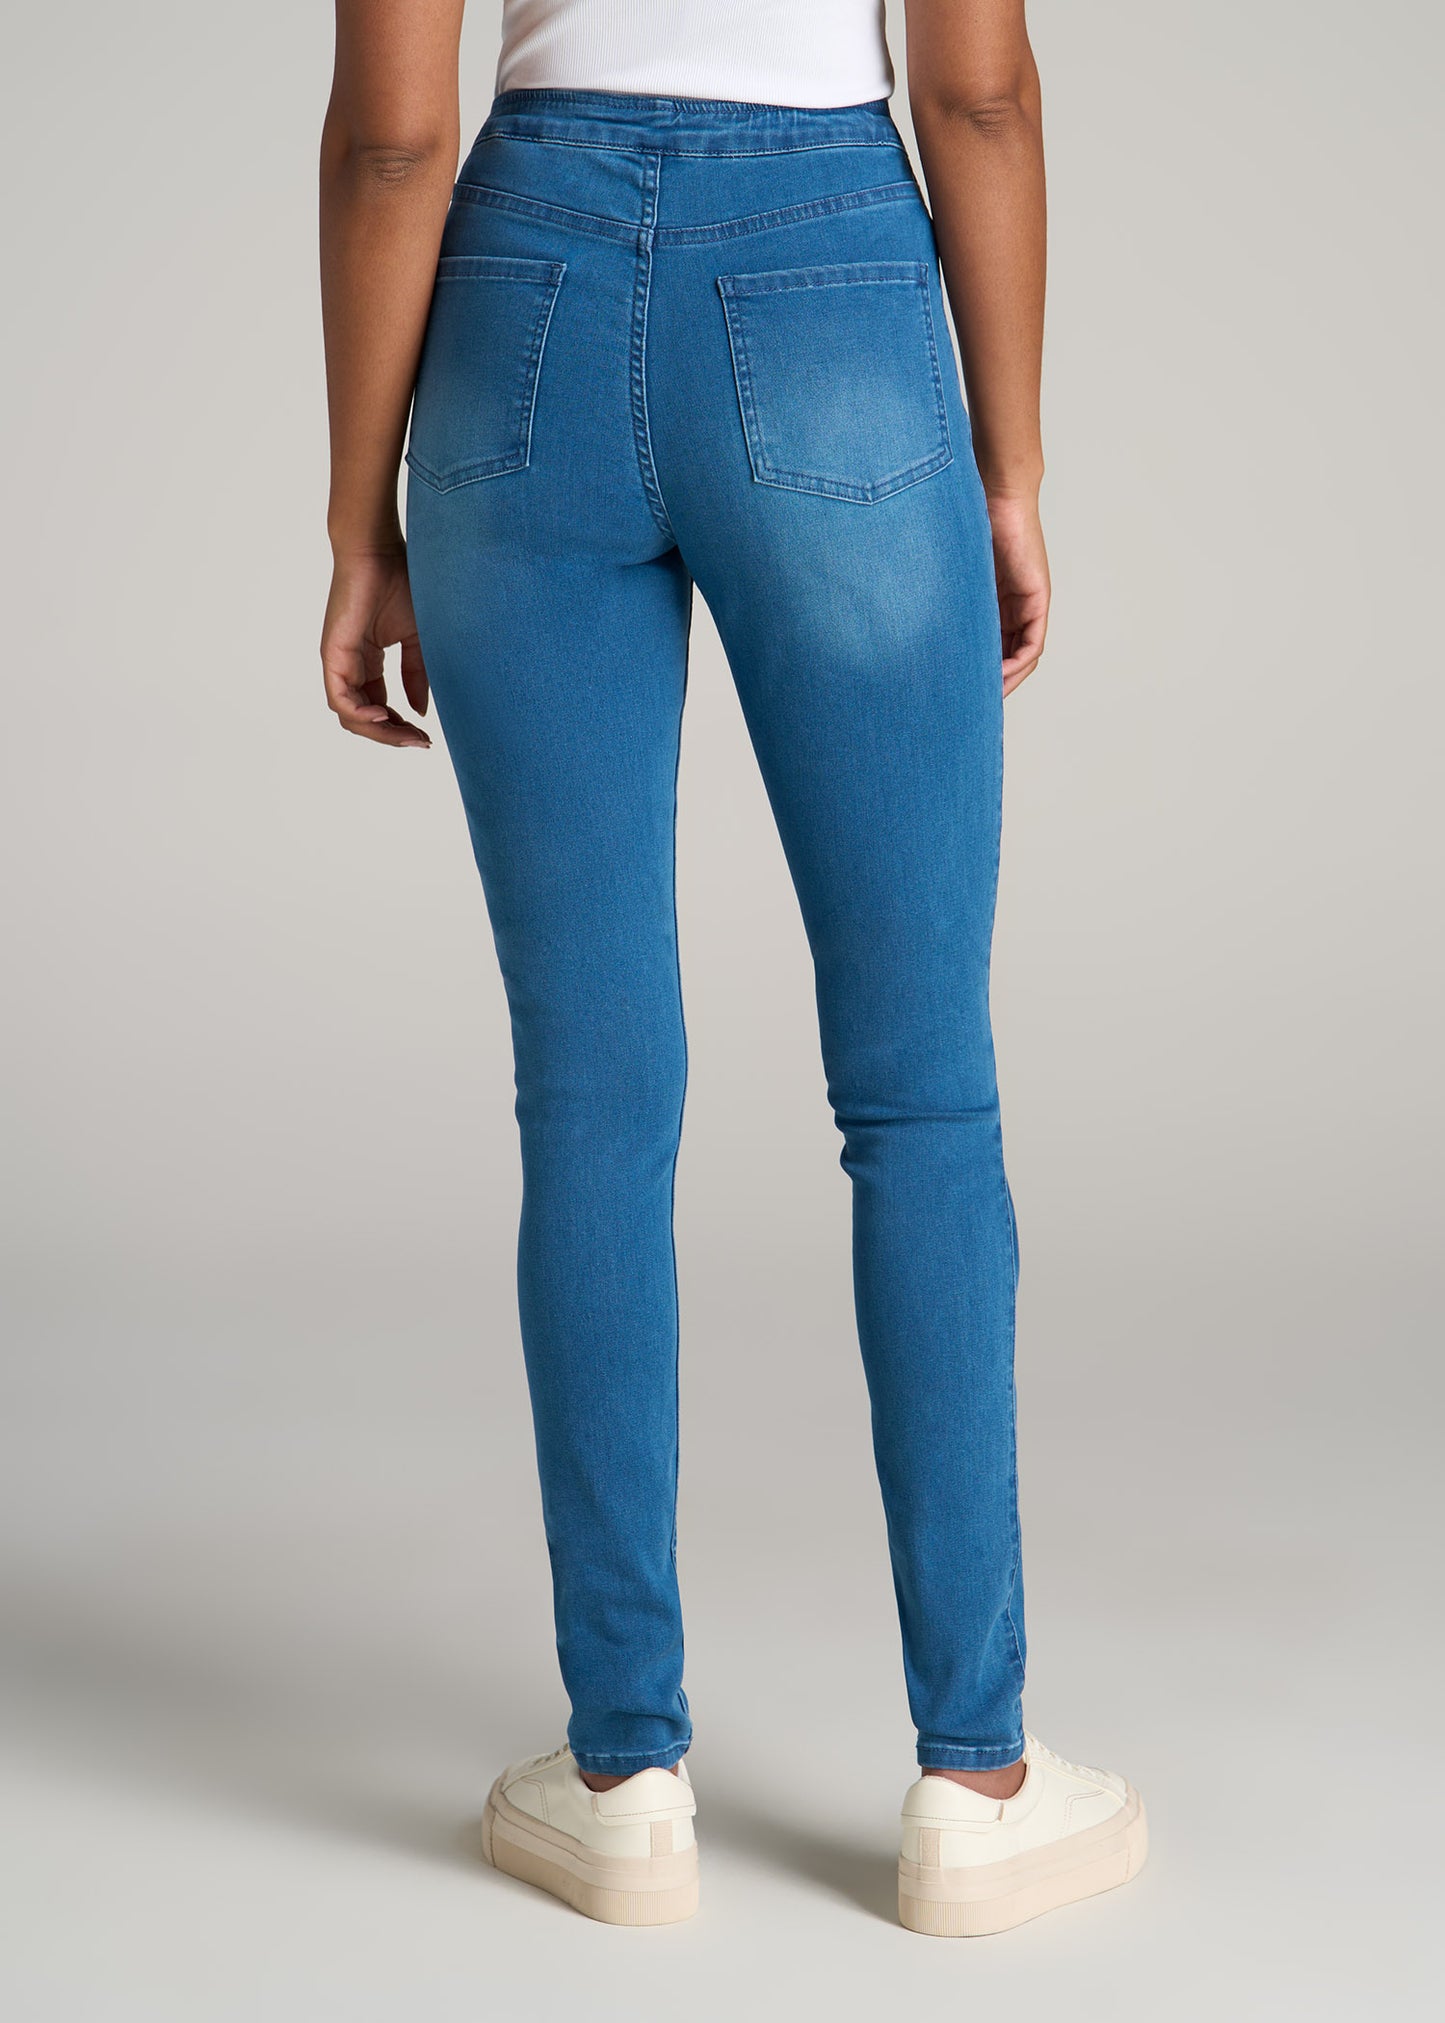 Women's Tall Jeggings in Classic Mid Blue